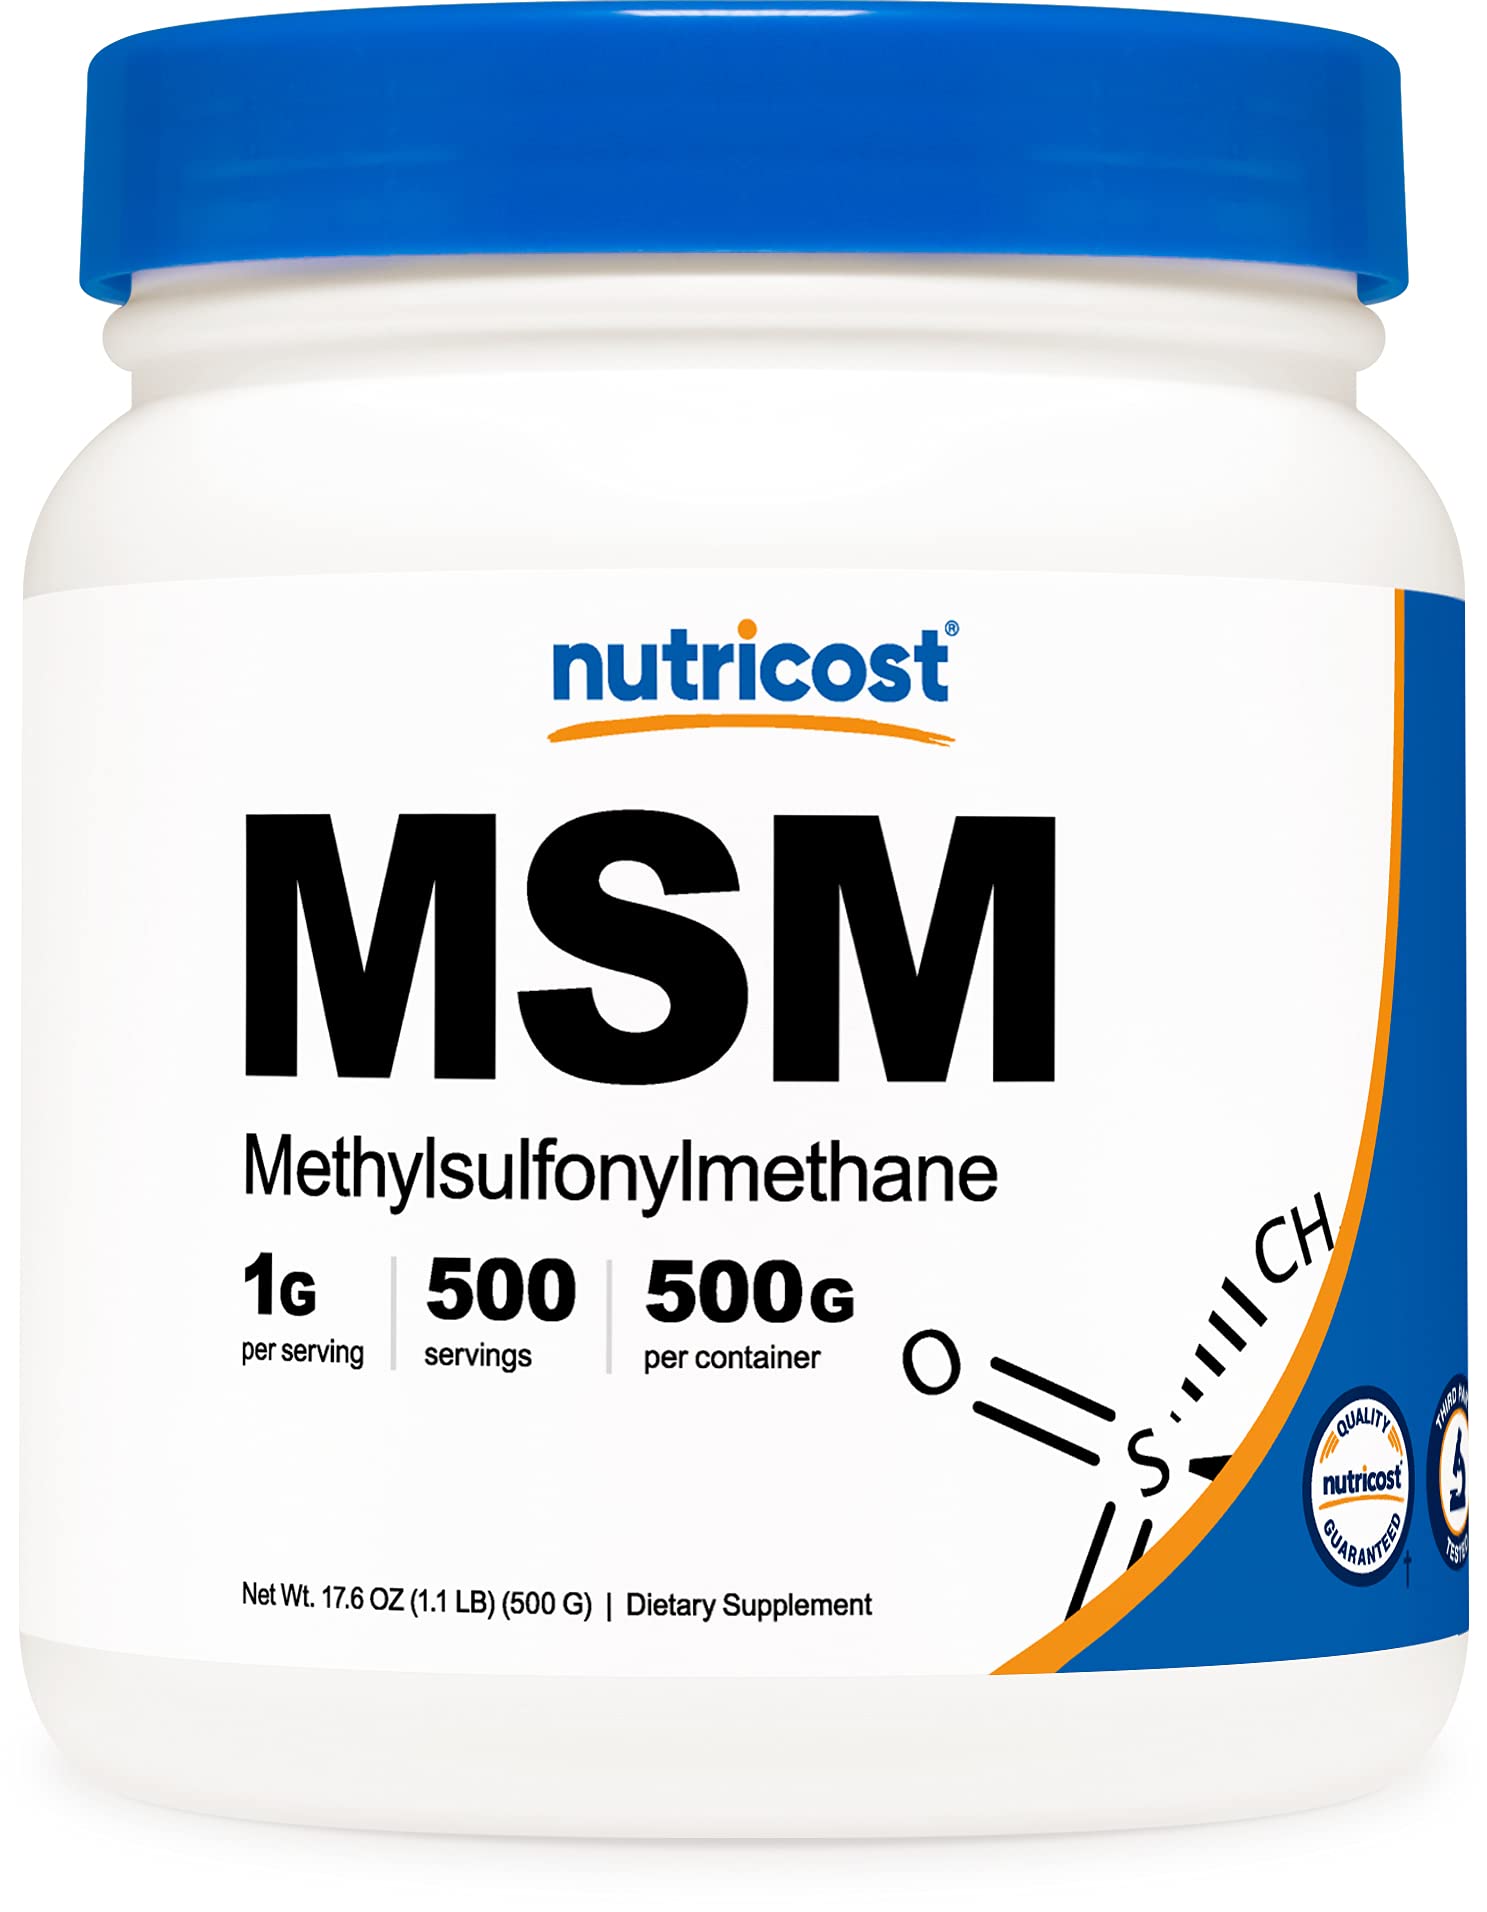 MSM Supplements - What Are Their Health Benefits?